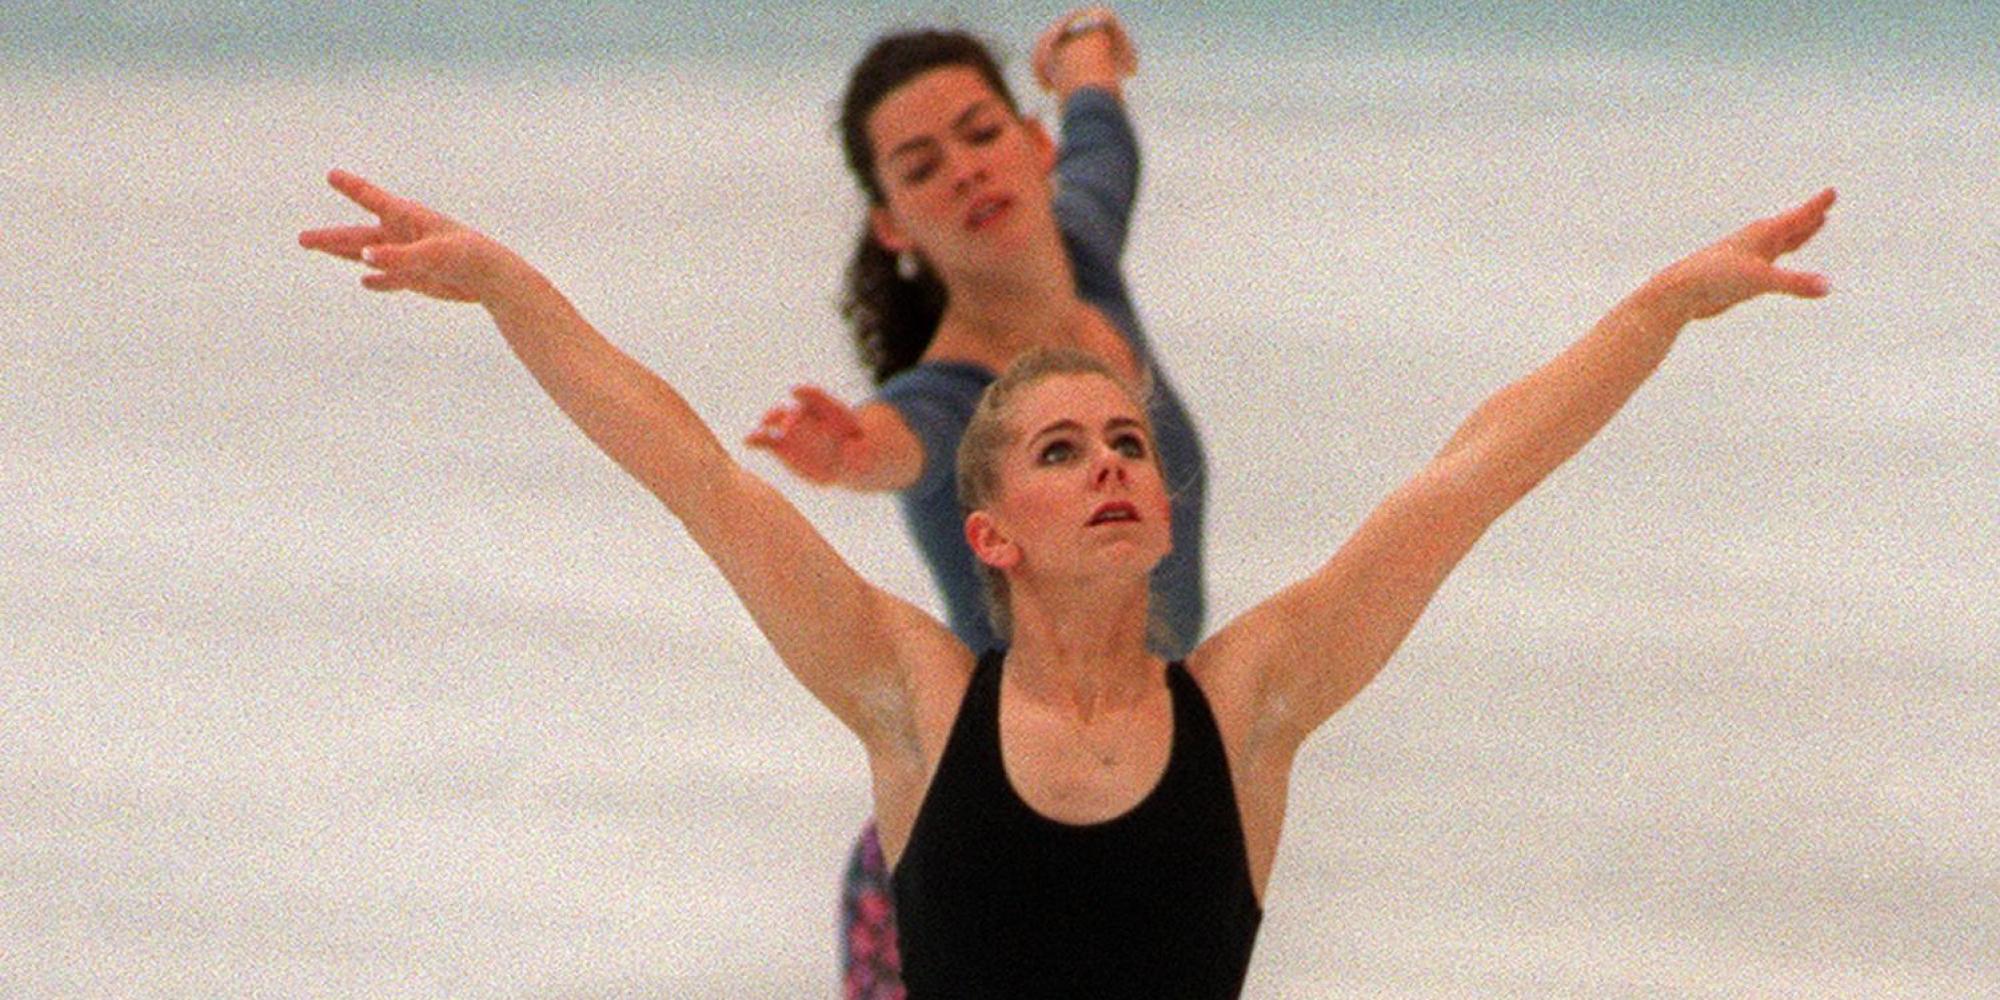 What We Missed About The Nancy Kerrigan Tonya Harding Scandal Years Ago HuffPost